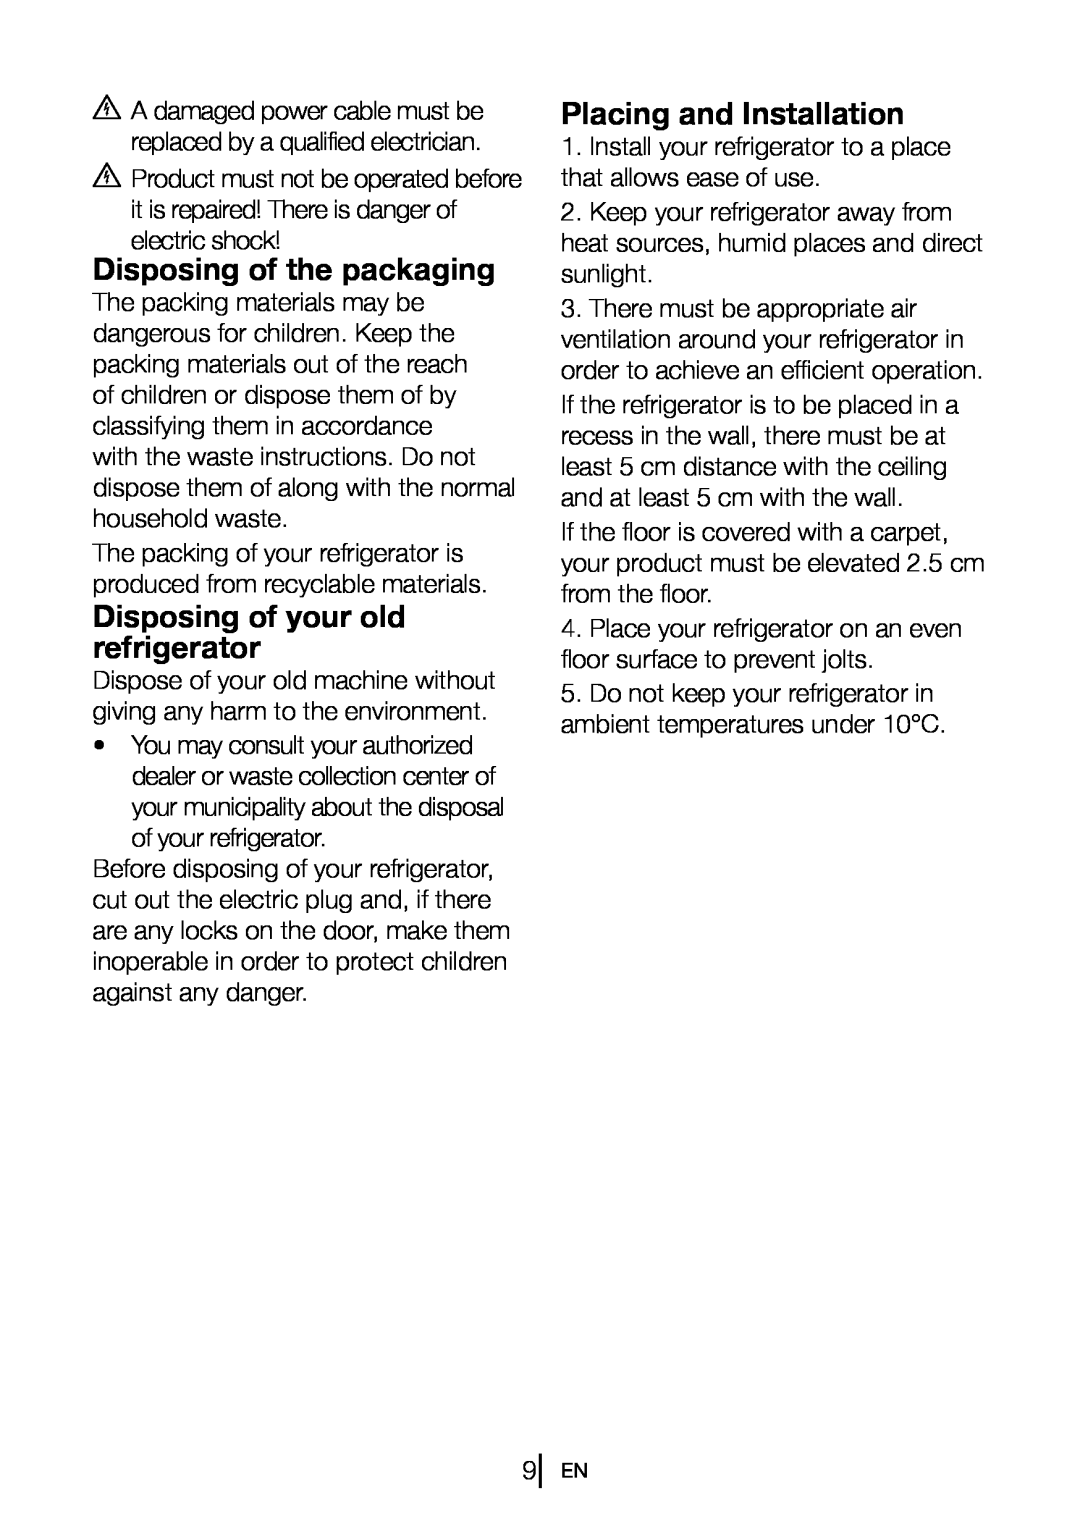 Blomberg FNT 9681 A+, FNT 9682 A+ Disposing of the packaging, Disposing of your old refrigerator, Placing and Installation 